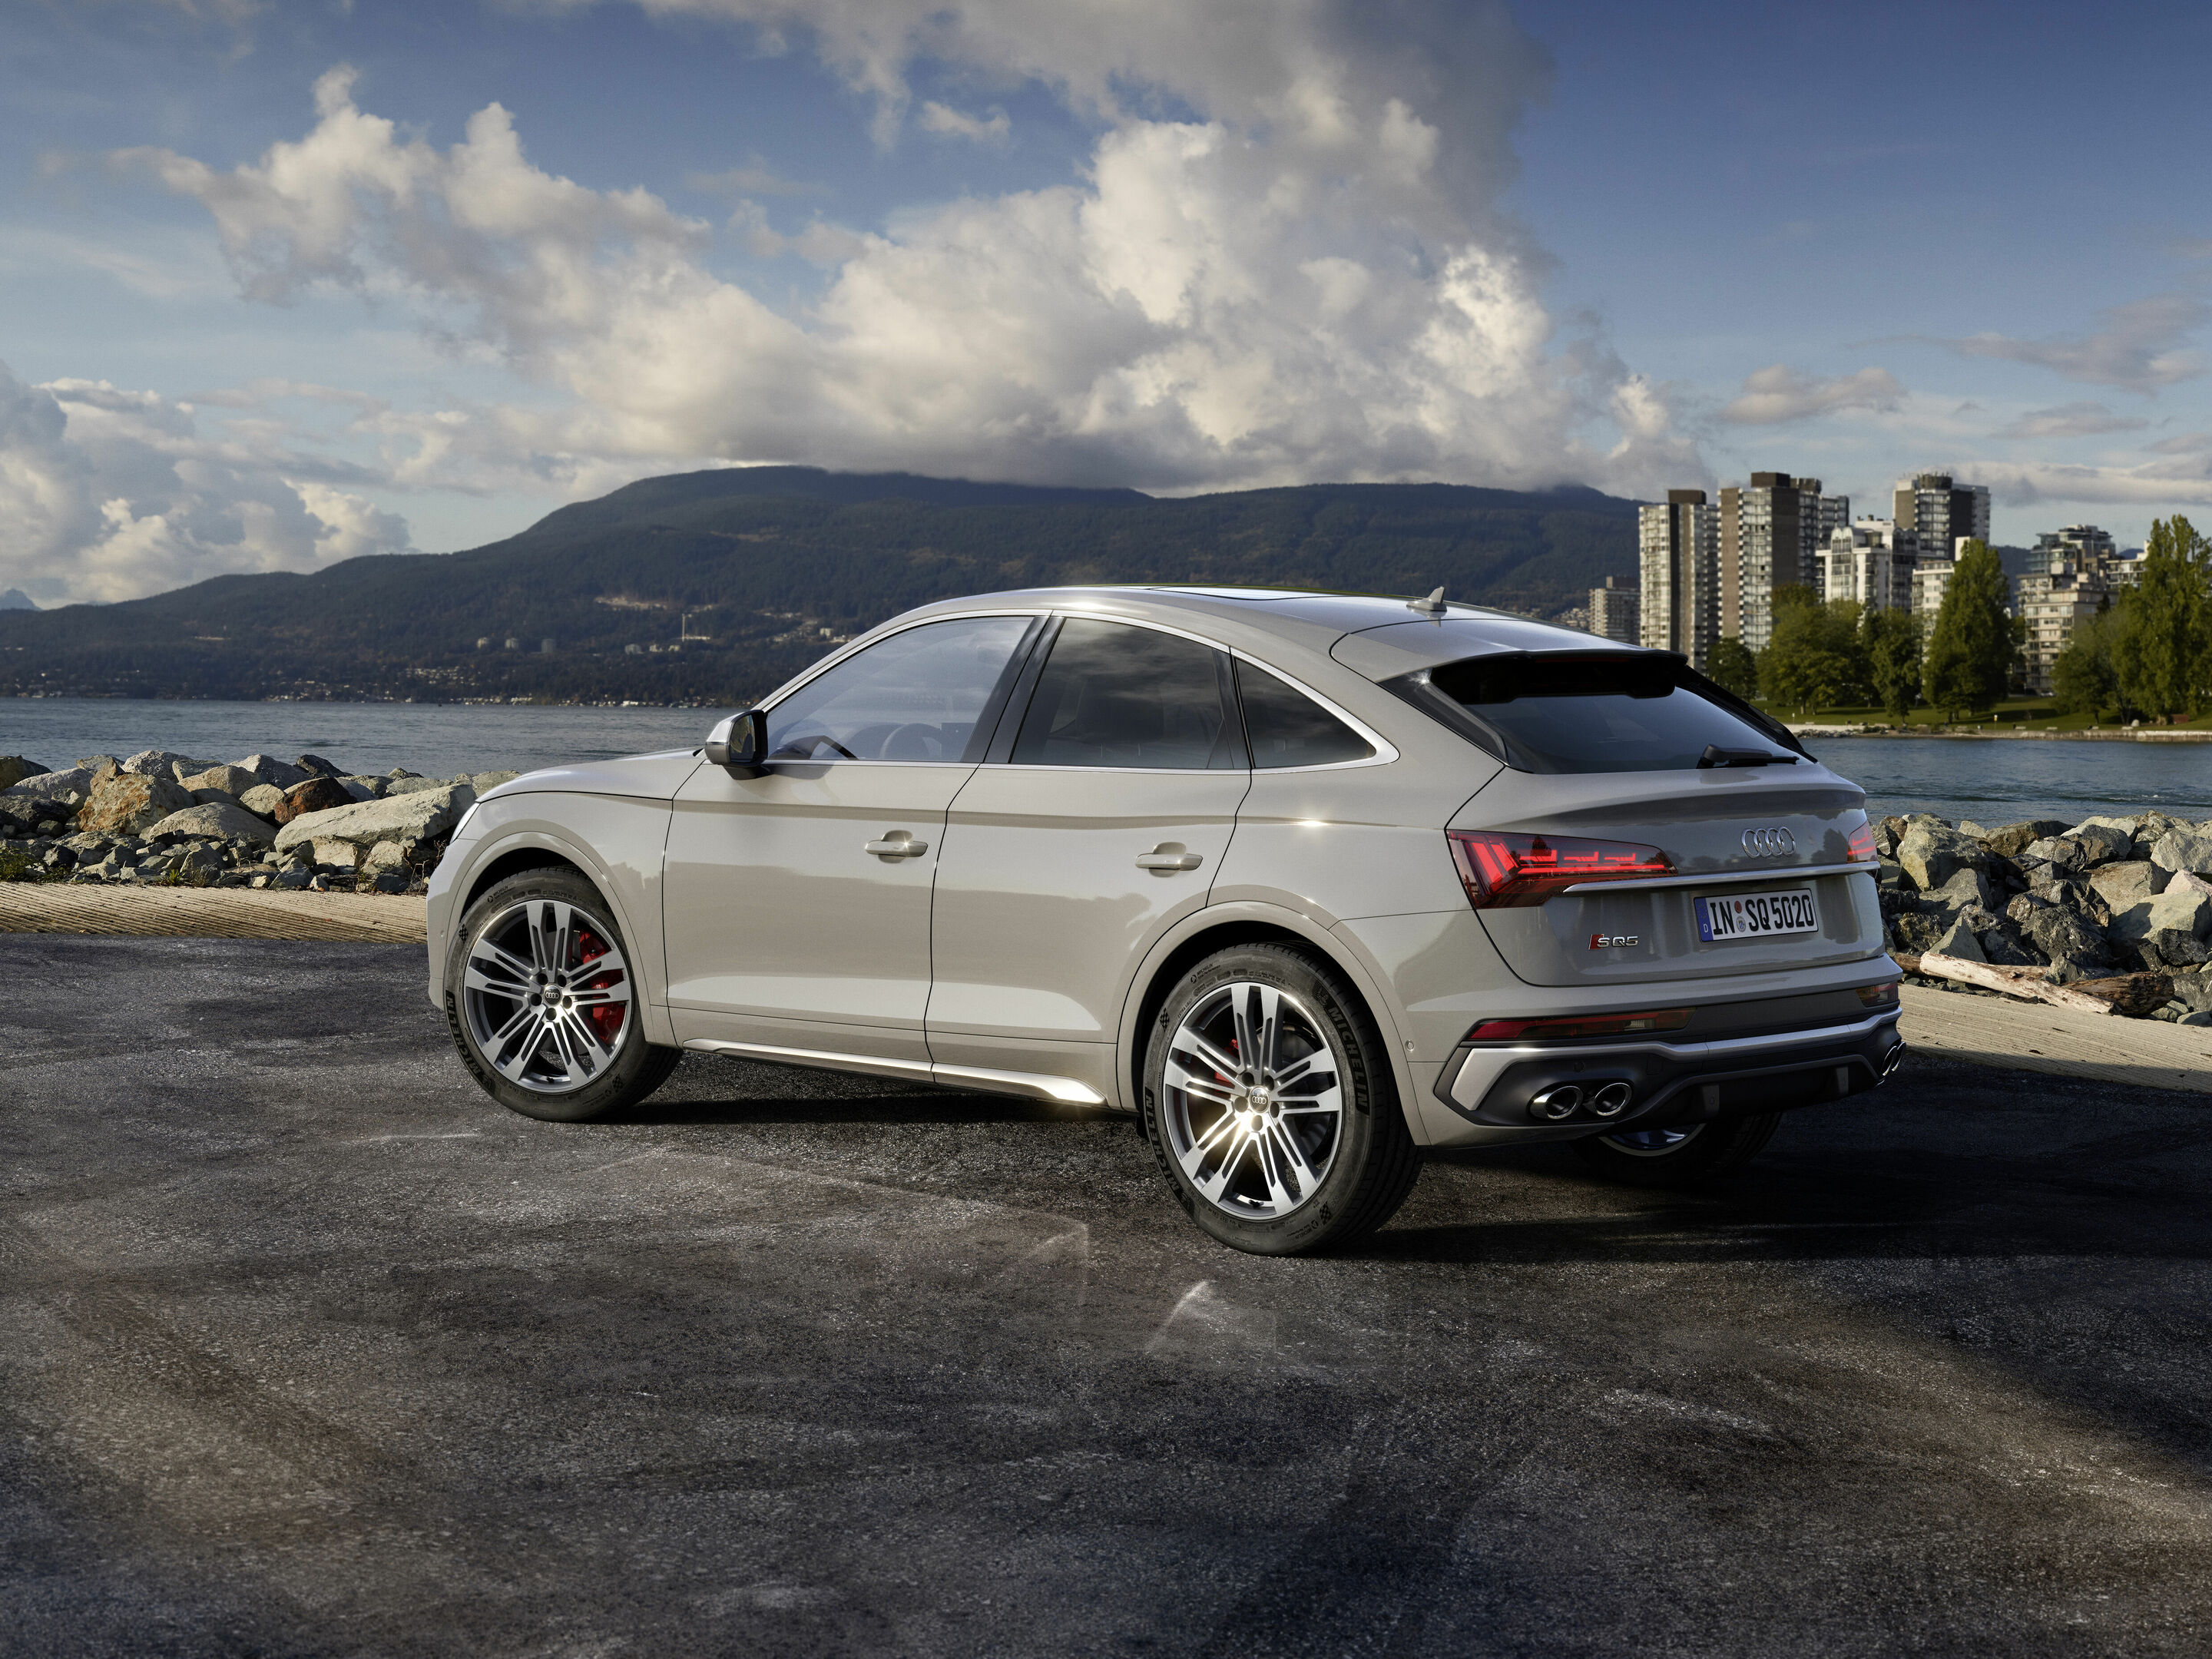 Sporty, practical and elegant: The Q5 Sportback and the SQ5